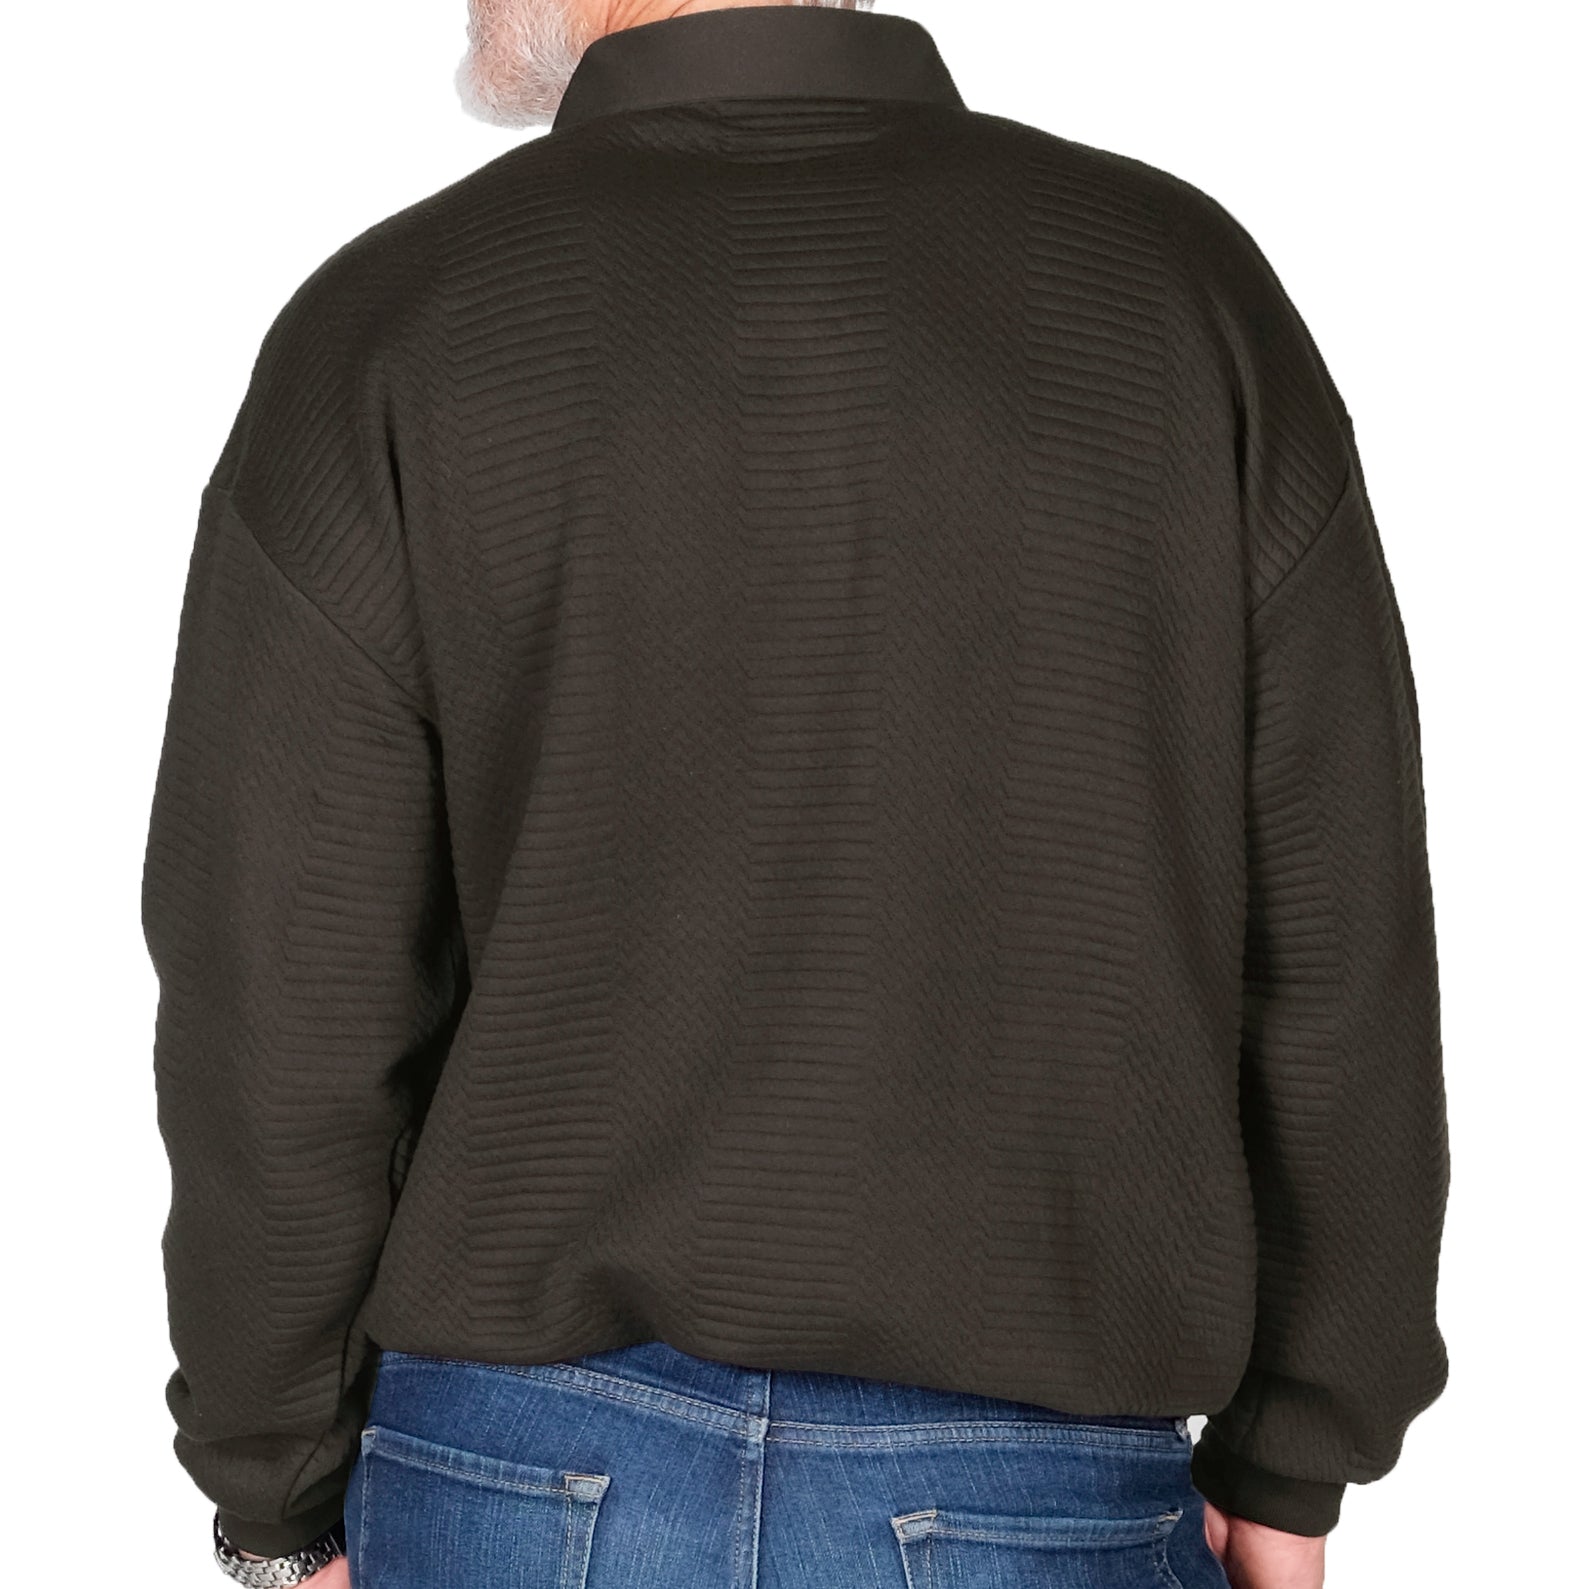 LD Sport Solid Textured Long Sleeve Banded Bottom Shirt - 6094-950 - Charcoal - Big and Tall